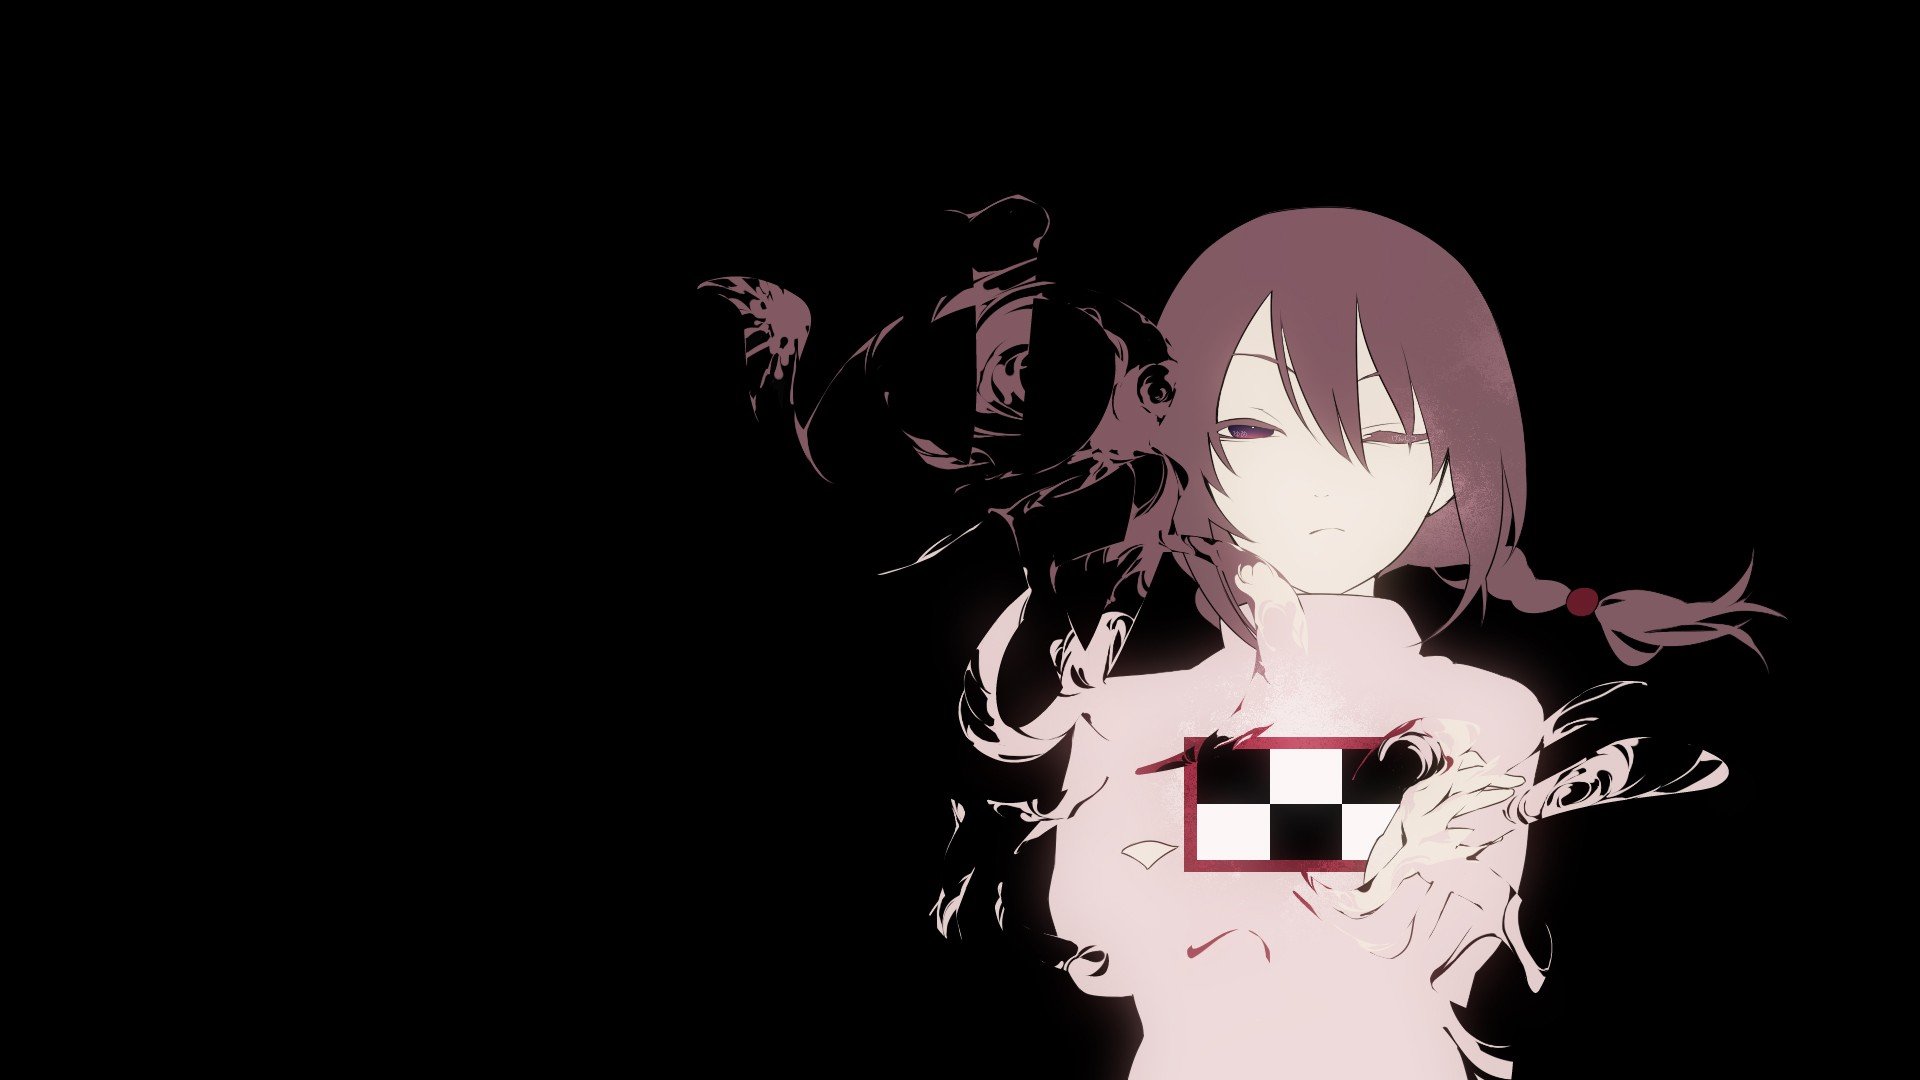 Yume Nikki Backgrounds, Compatible - PC, Mobile, Gadgets| 1920x1080 px